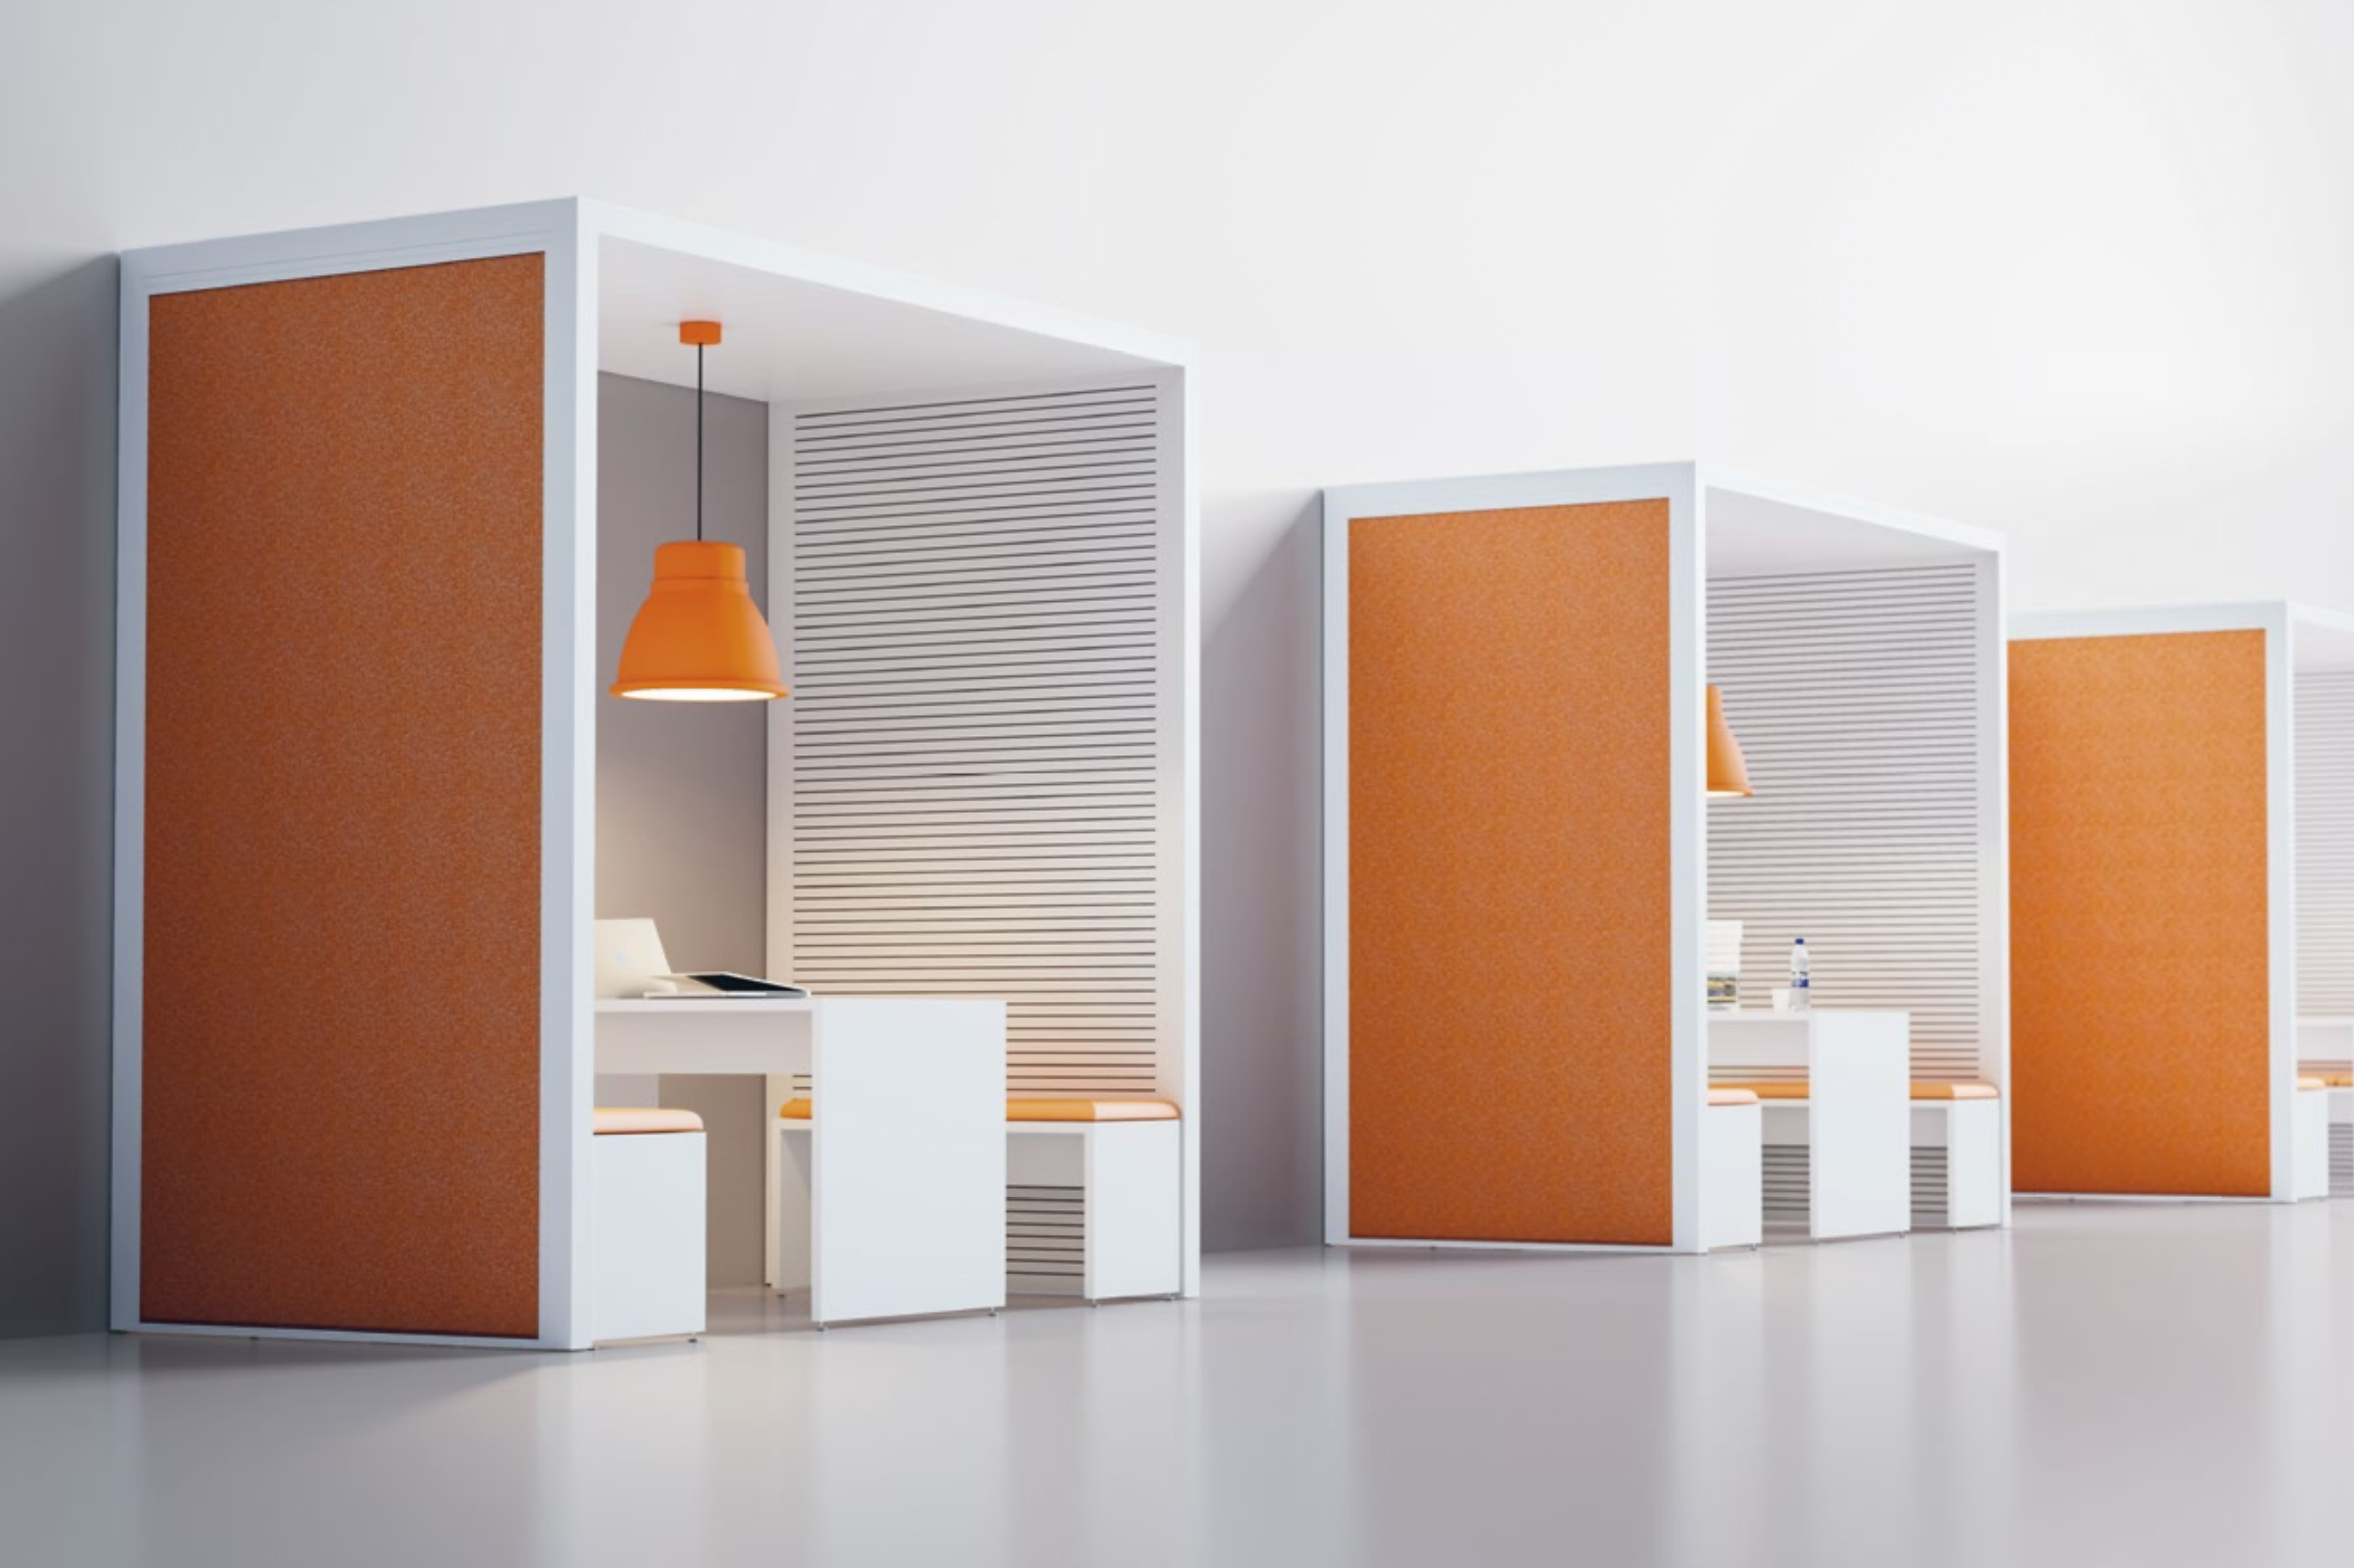 Fantoni office and moodspace acoustic cubicles